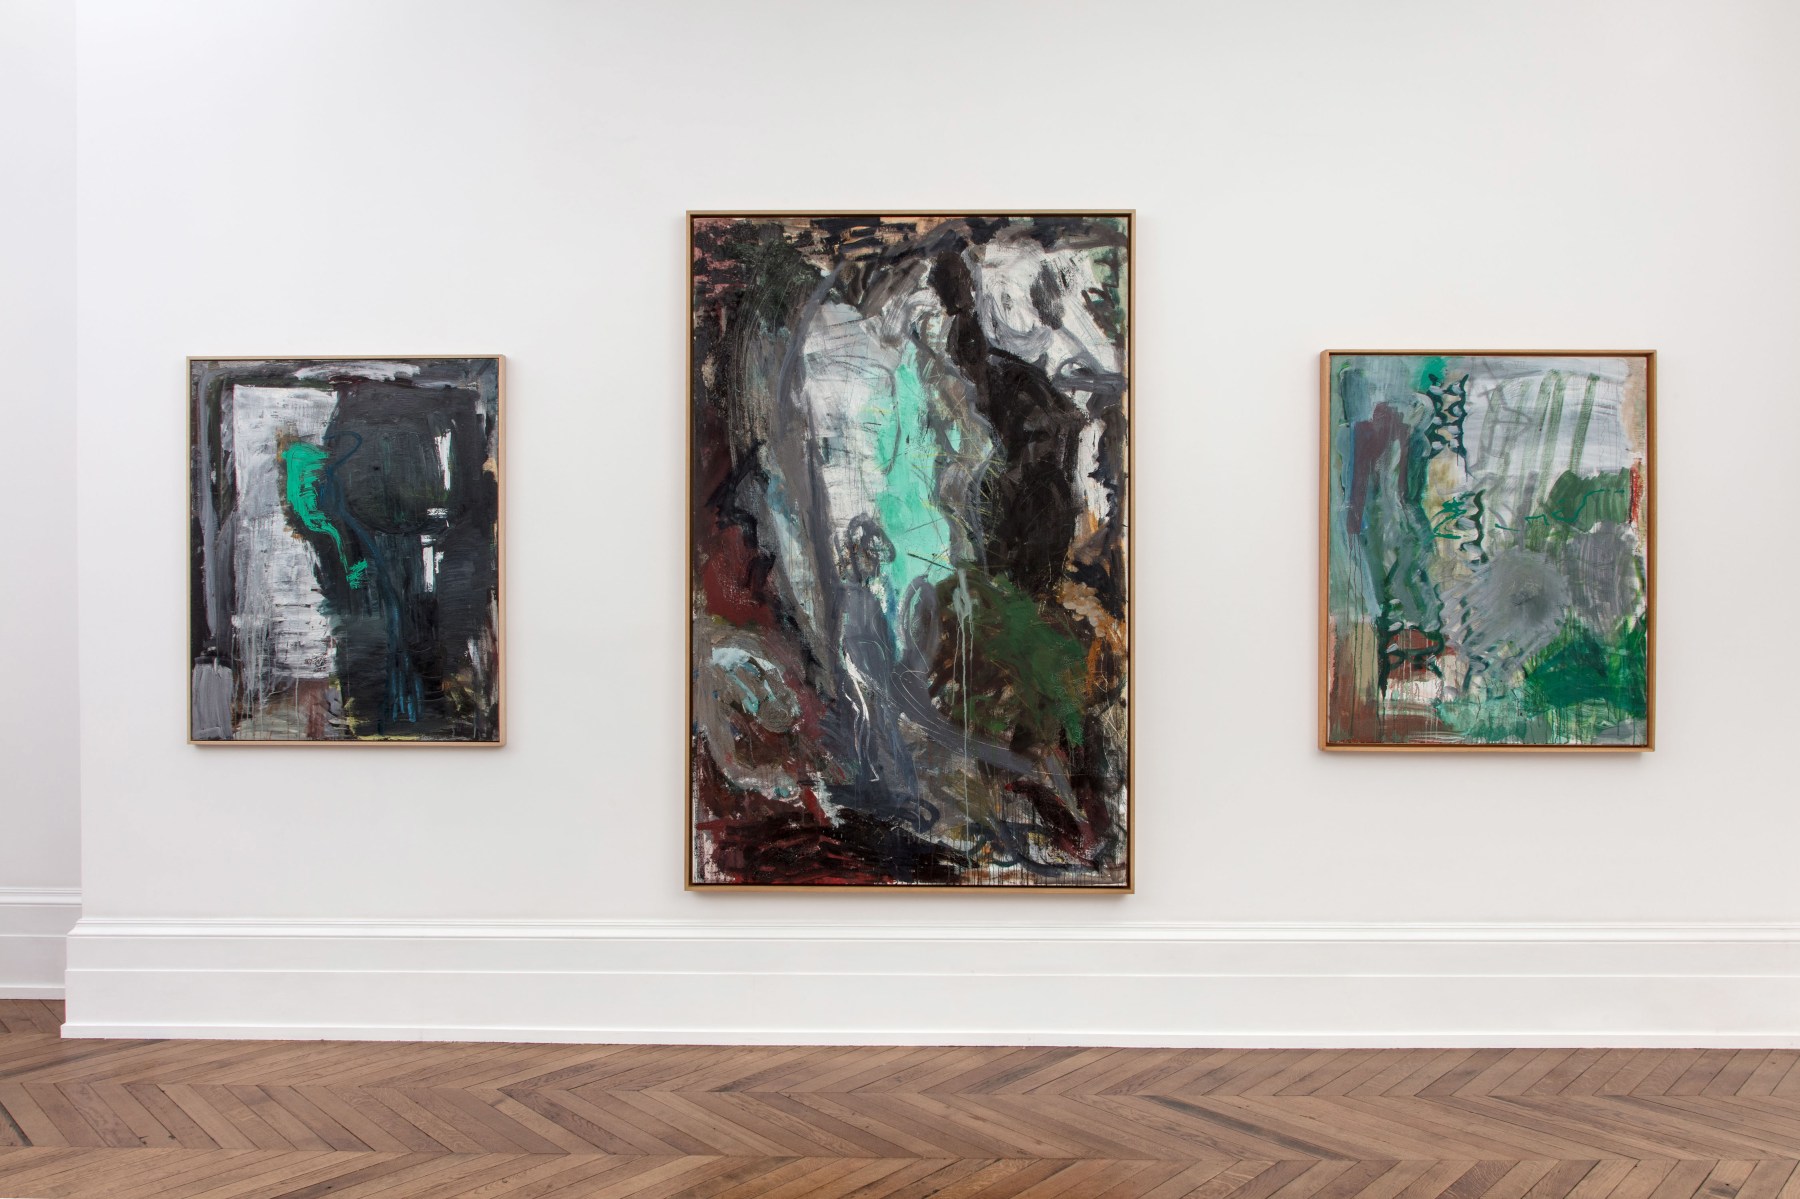 Per Kirkeby, Paintings and Bronzes from the 1980s, London, 2017, Installation Image 2